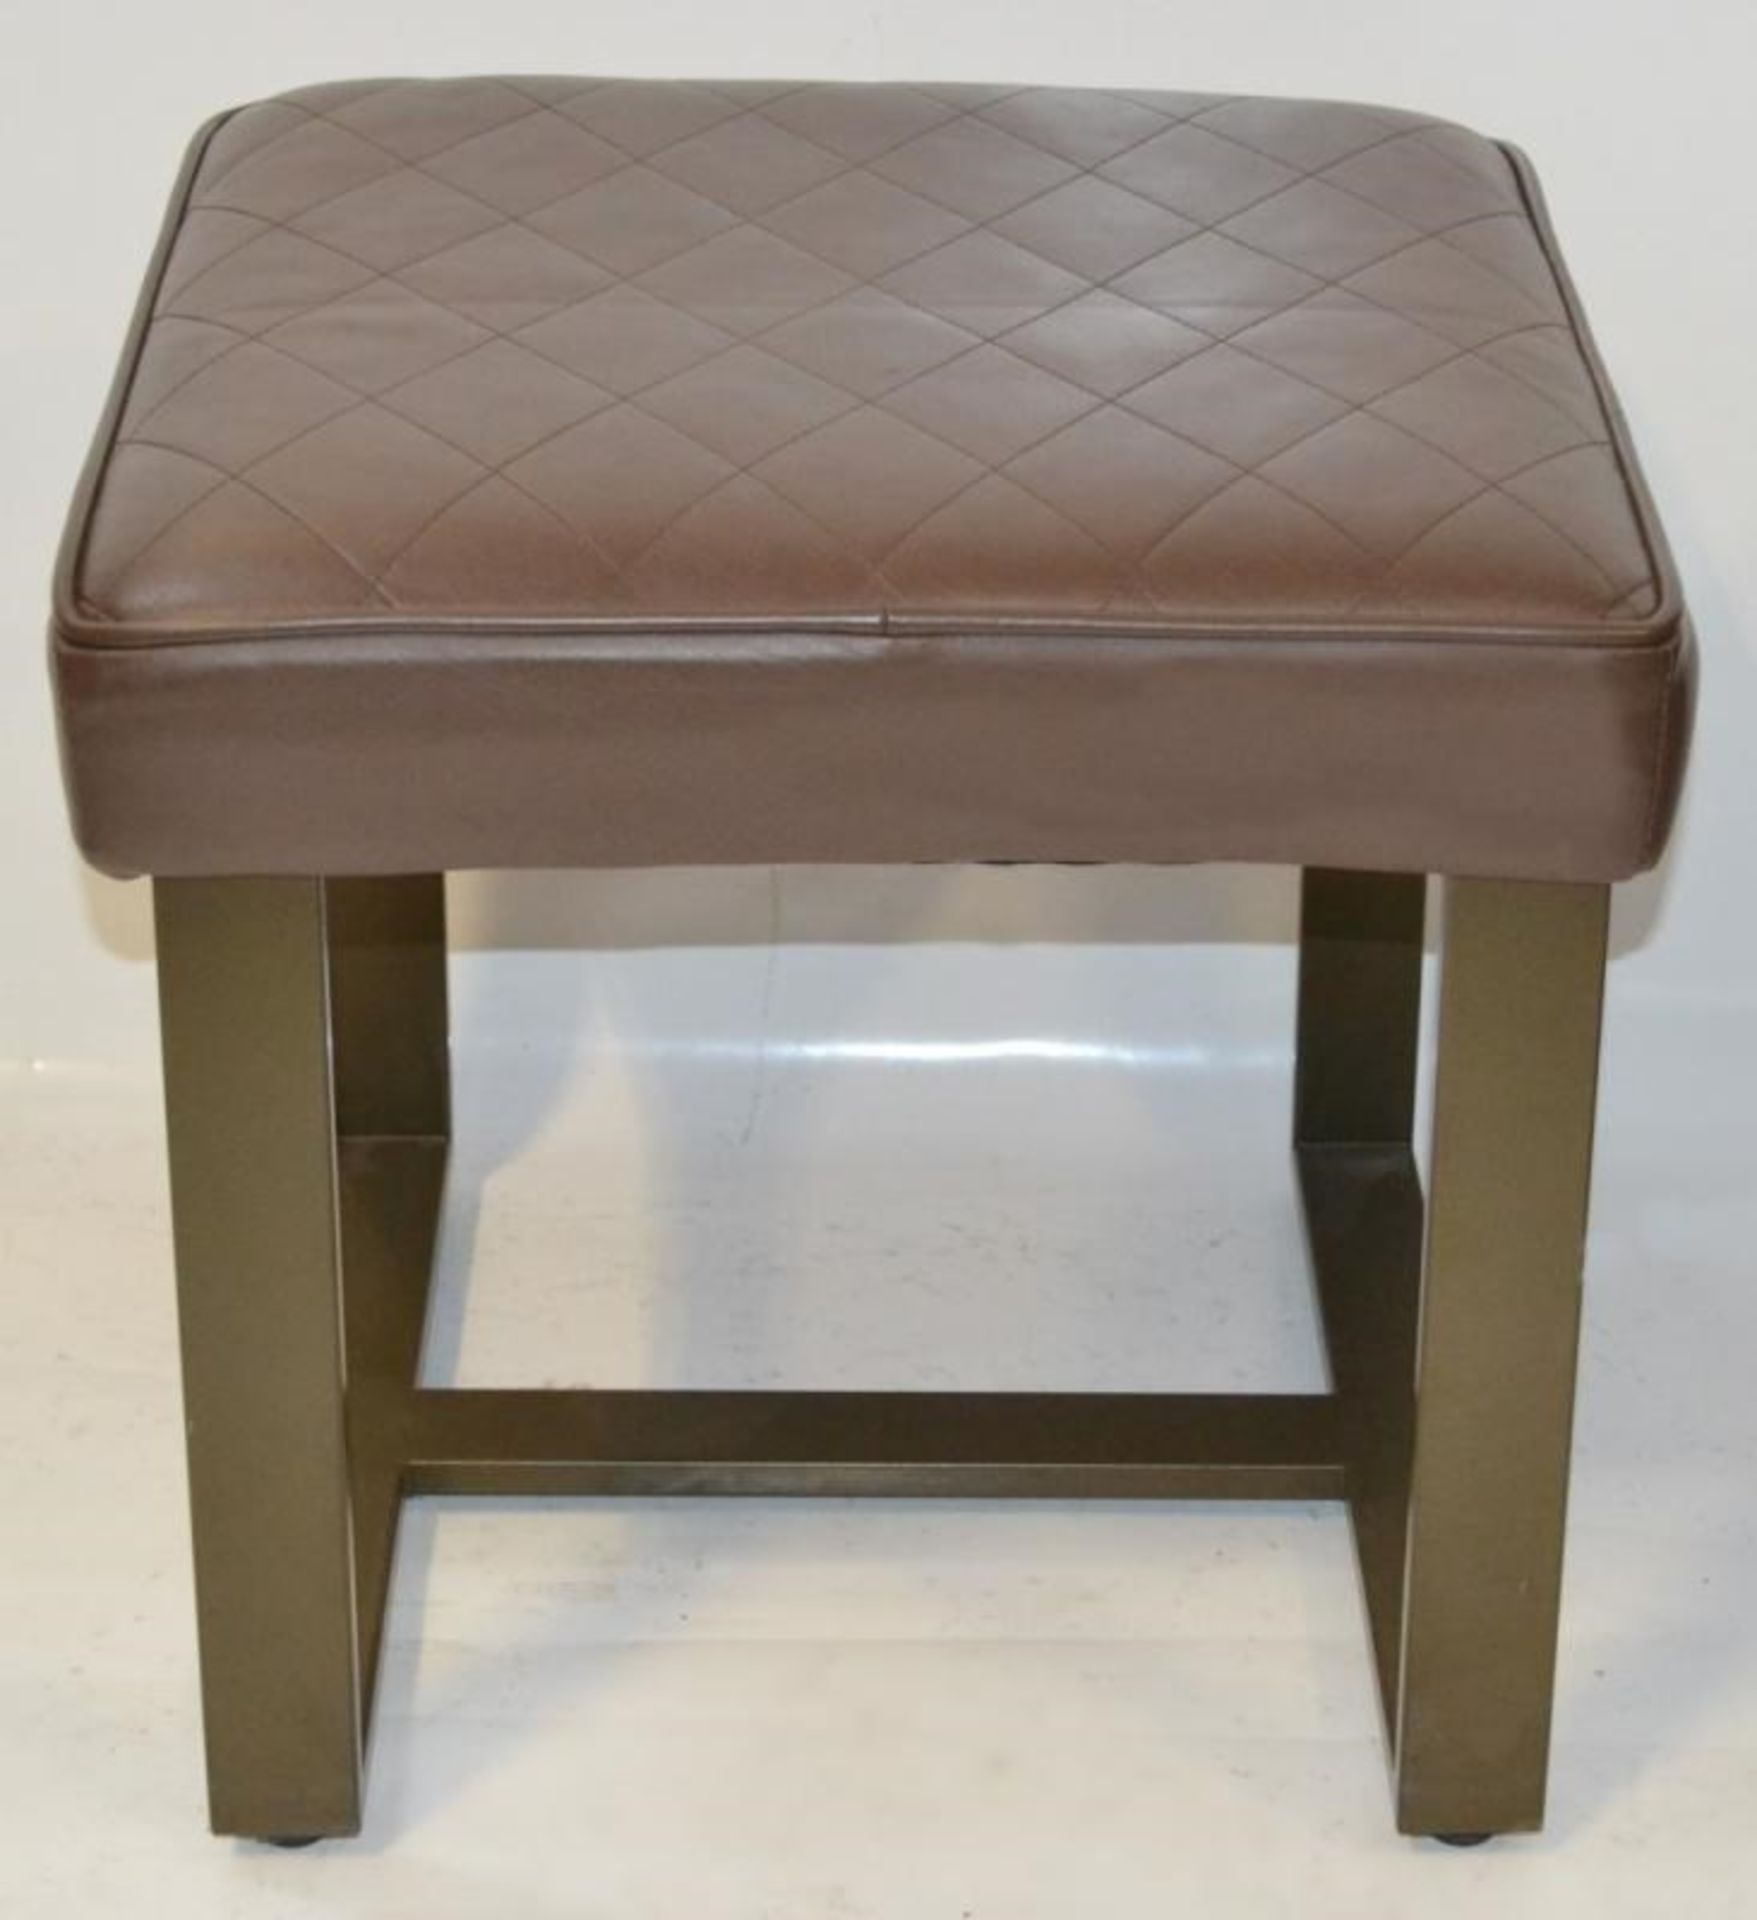 2 x Contemporary Seat Stools With Brown Faux Leather Cushioned Seat Pads